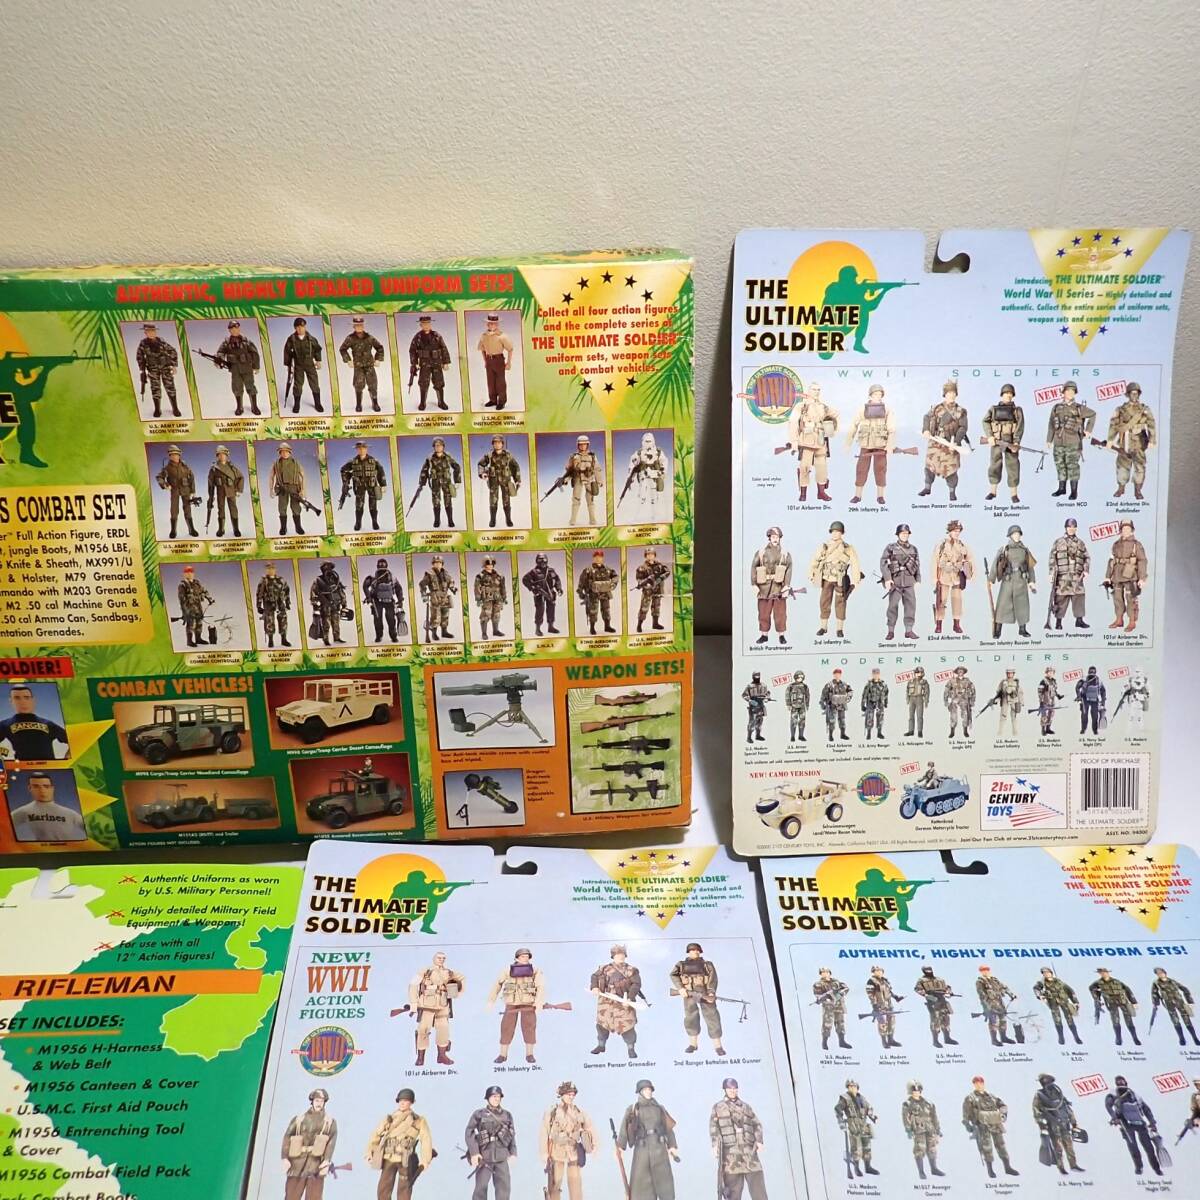 21ST CENTURY TOYS ULTIMATE SOLDIER military figure weapon u Epo n military uniform together set 11 point unopened unused present condition goods large amount YE139